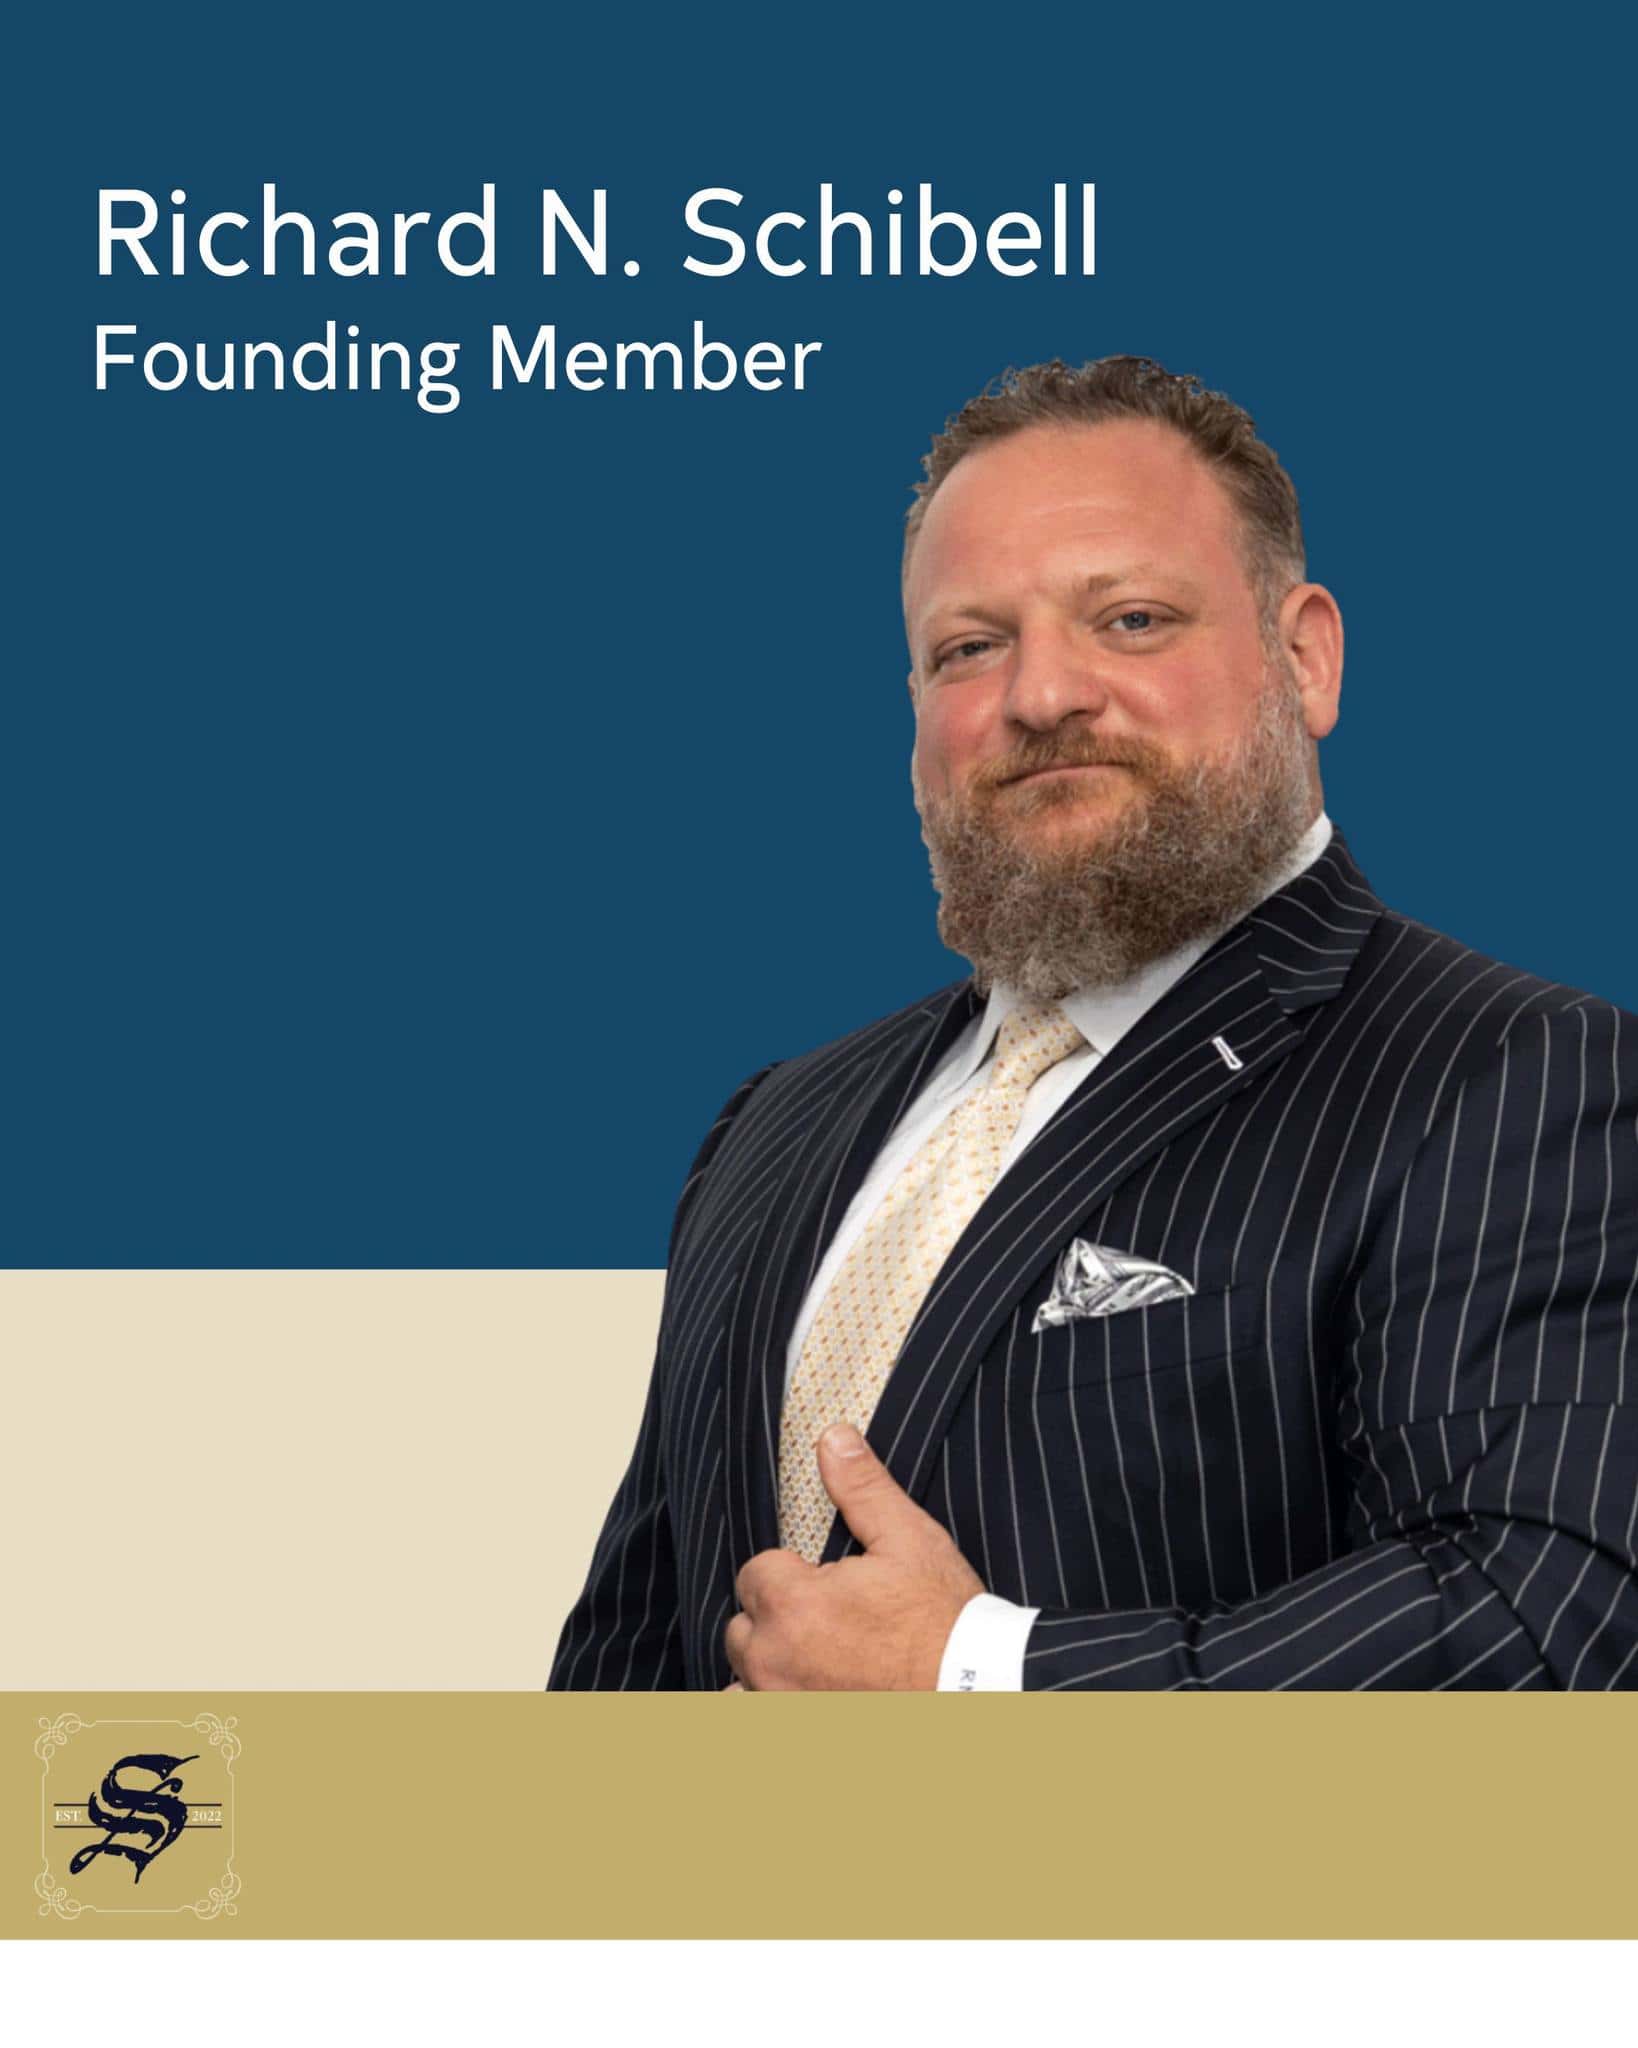 Schibell Law Injury and Accident Attorneys - Howell Township, NJ, US, workers compensation